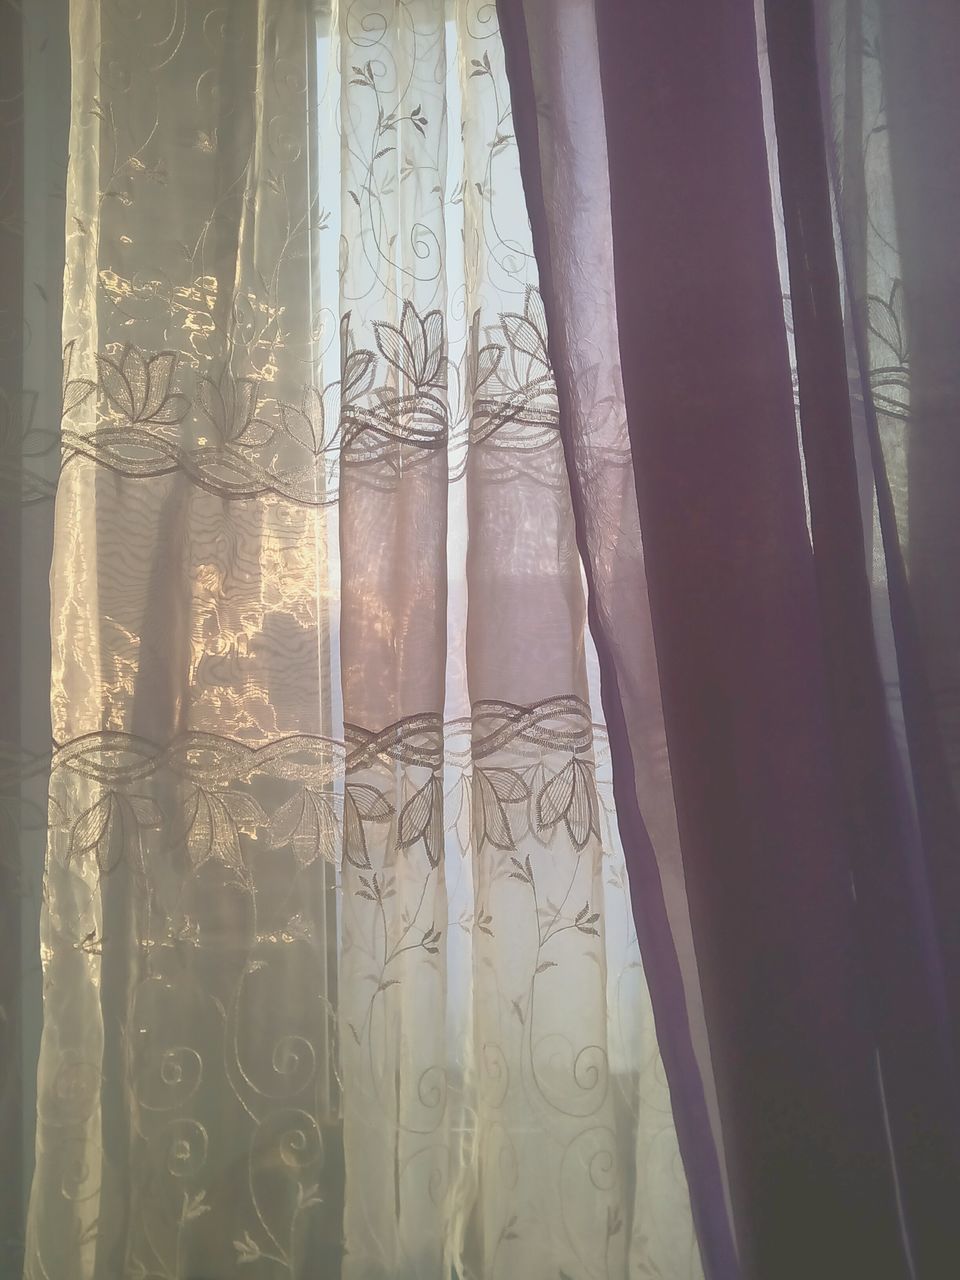 curtain, window, textile, drapes, no people, indoors, backgrounds, full frame, close-up, sky, day, sunset, fabric, tree, nature